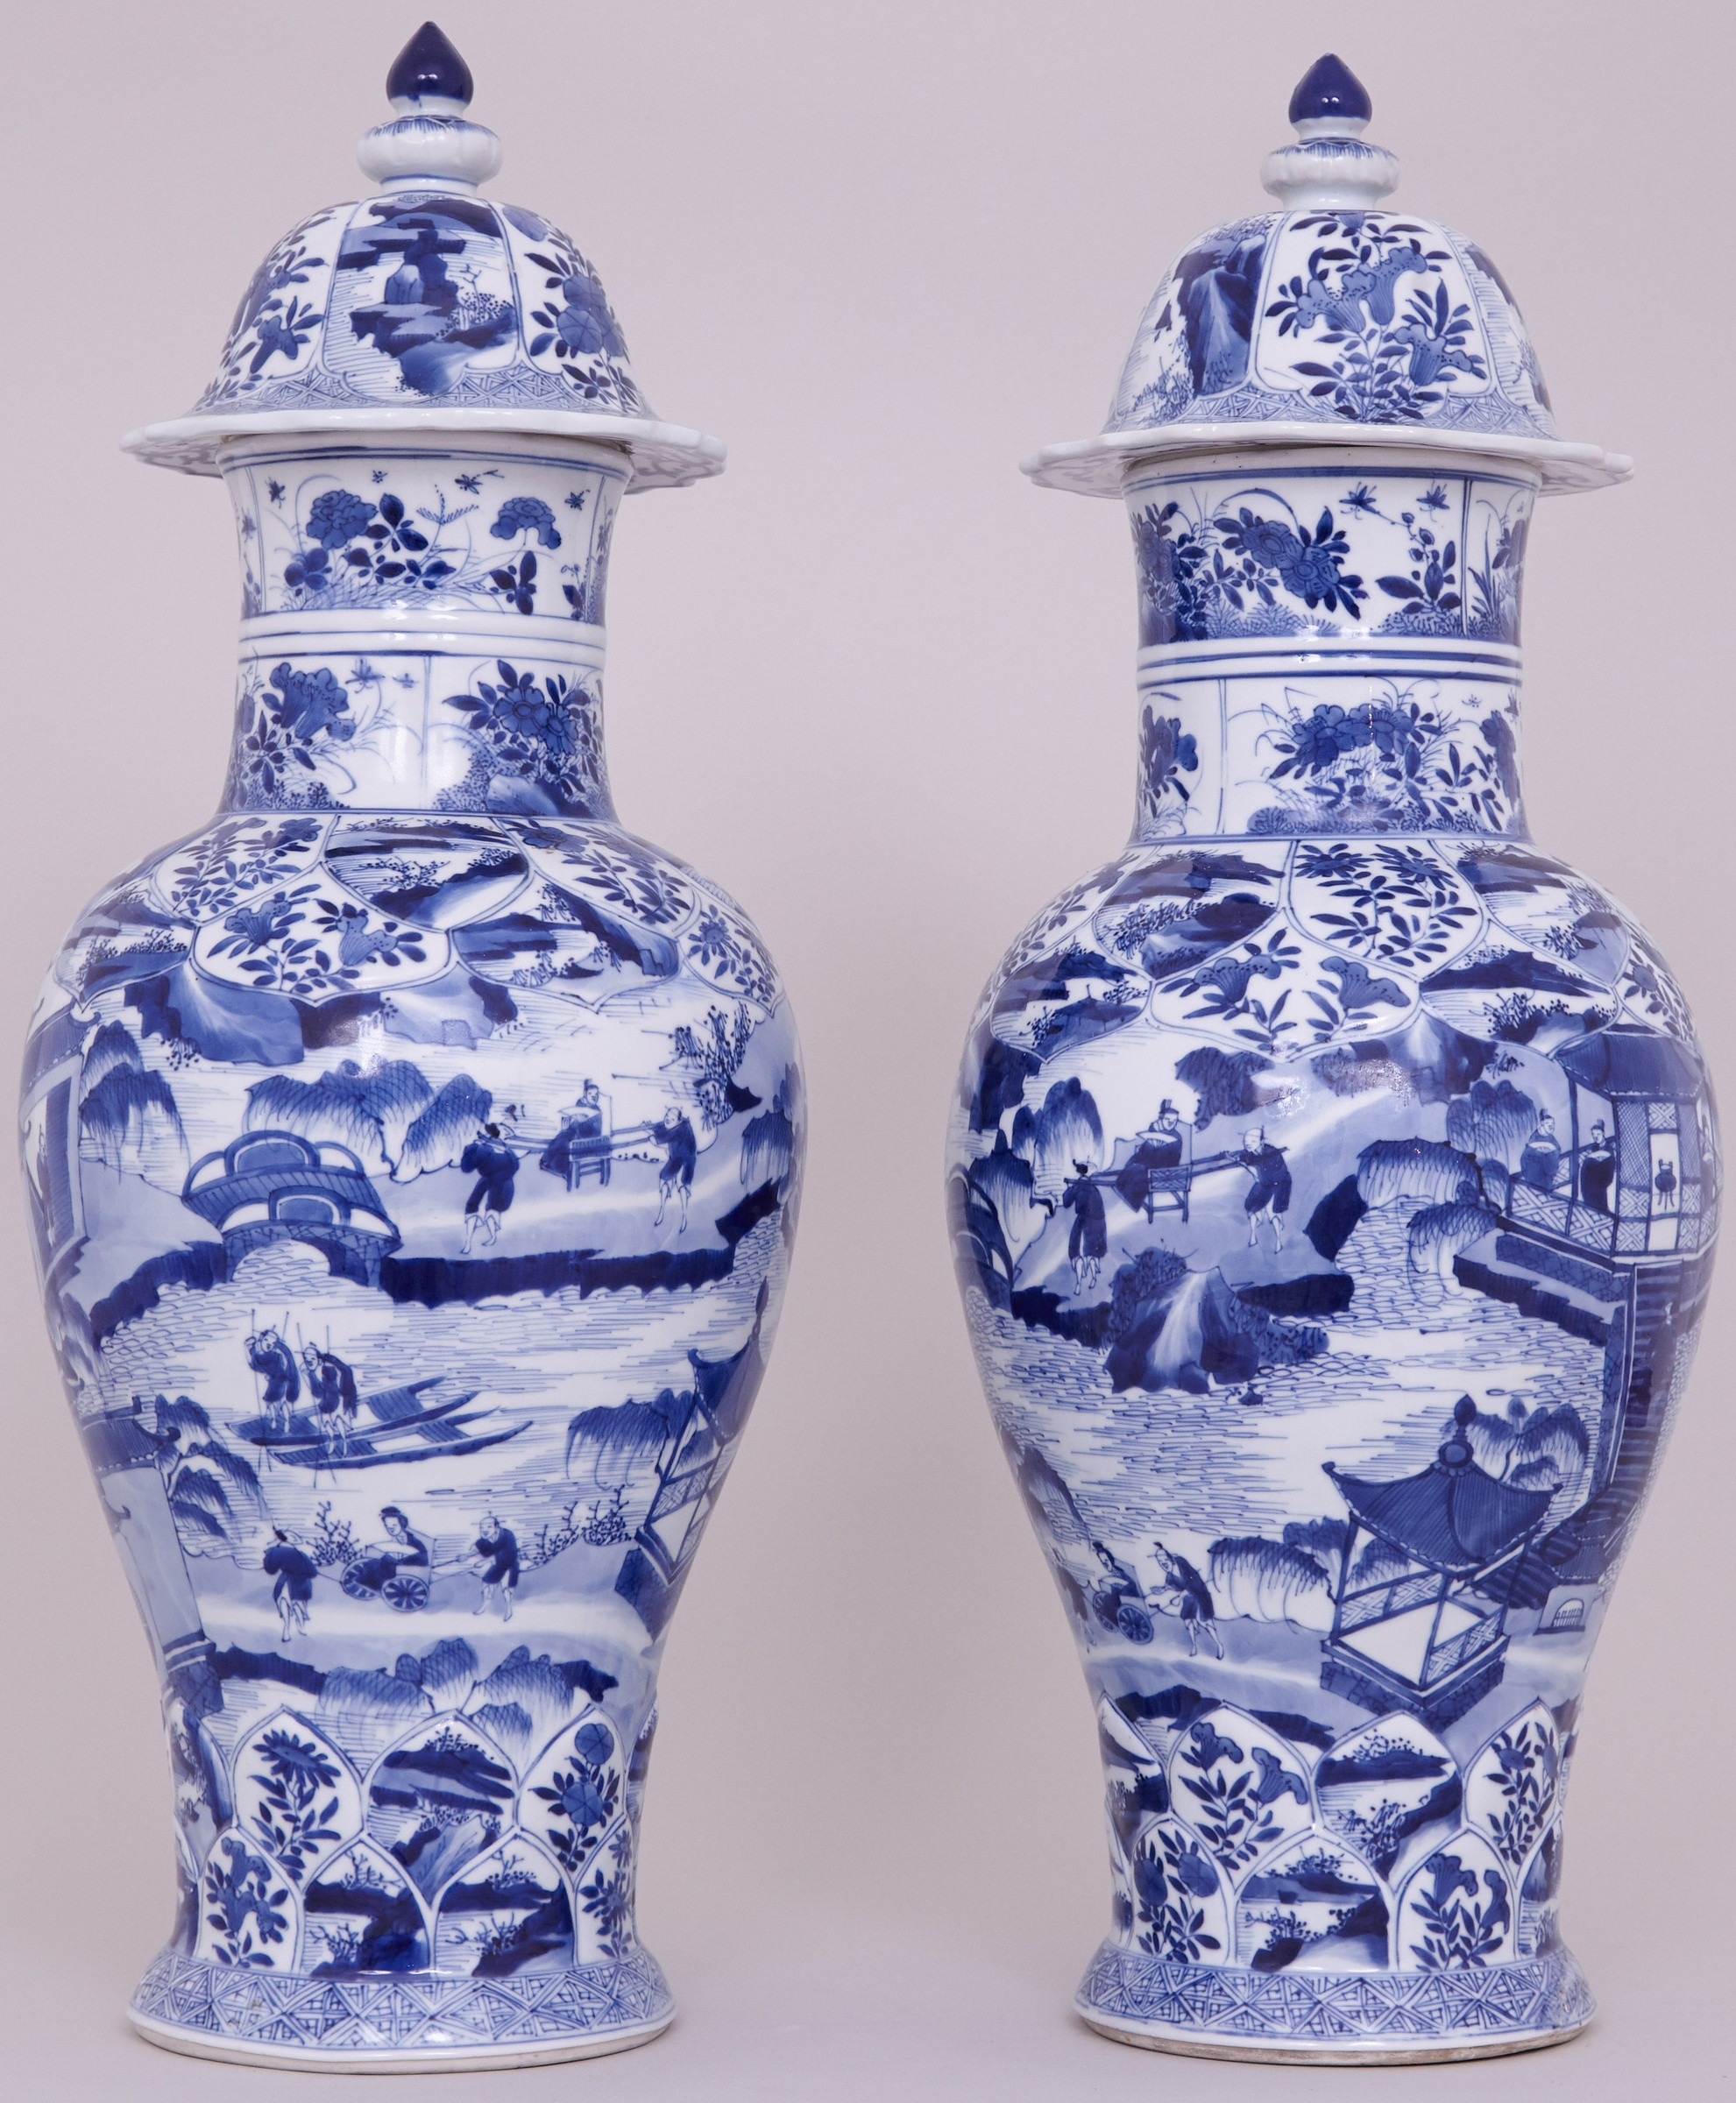 13 Awesome Chinese Pottery Vase 2024 free download chinese pottery vase of a pair of highly unusual tall and fine chinese blue and white vases within a pair of highly unusual tall and fine chinese blue and white vases and covers